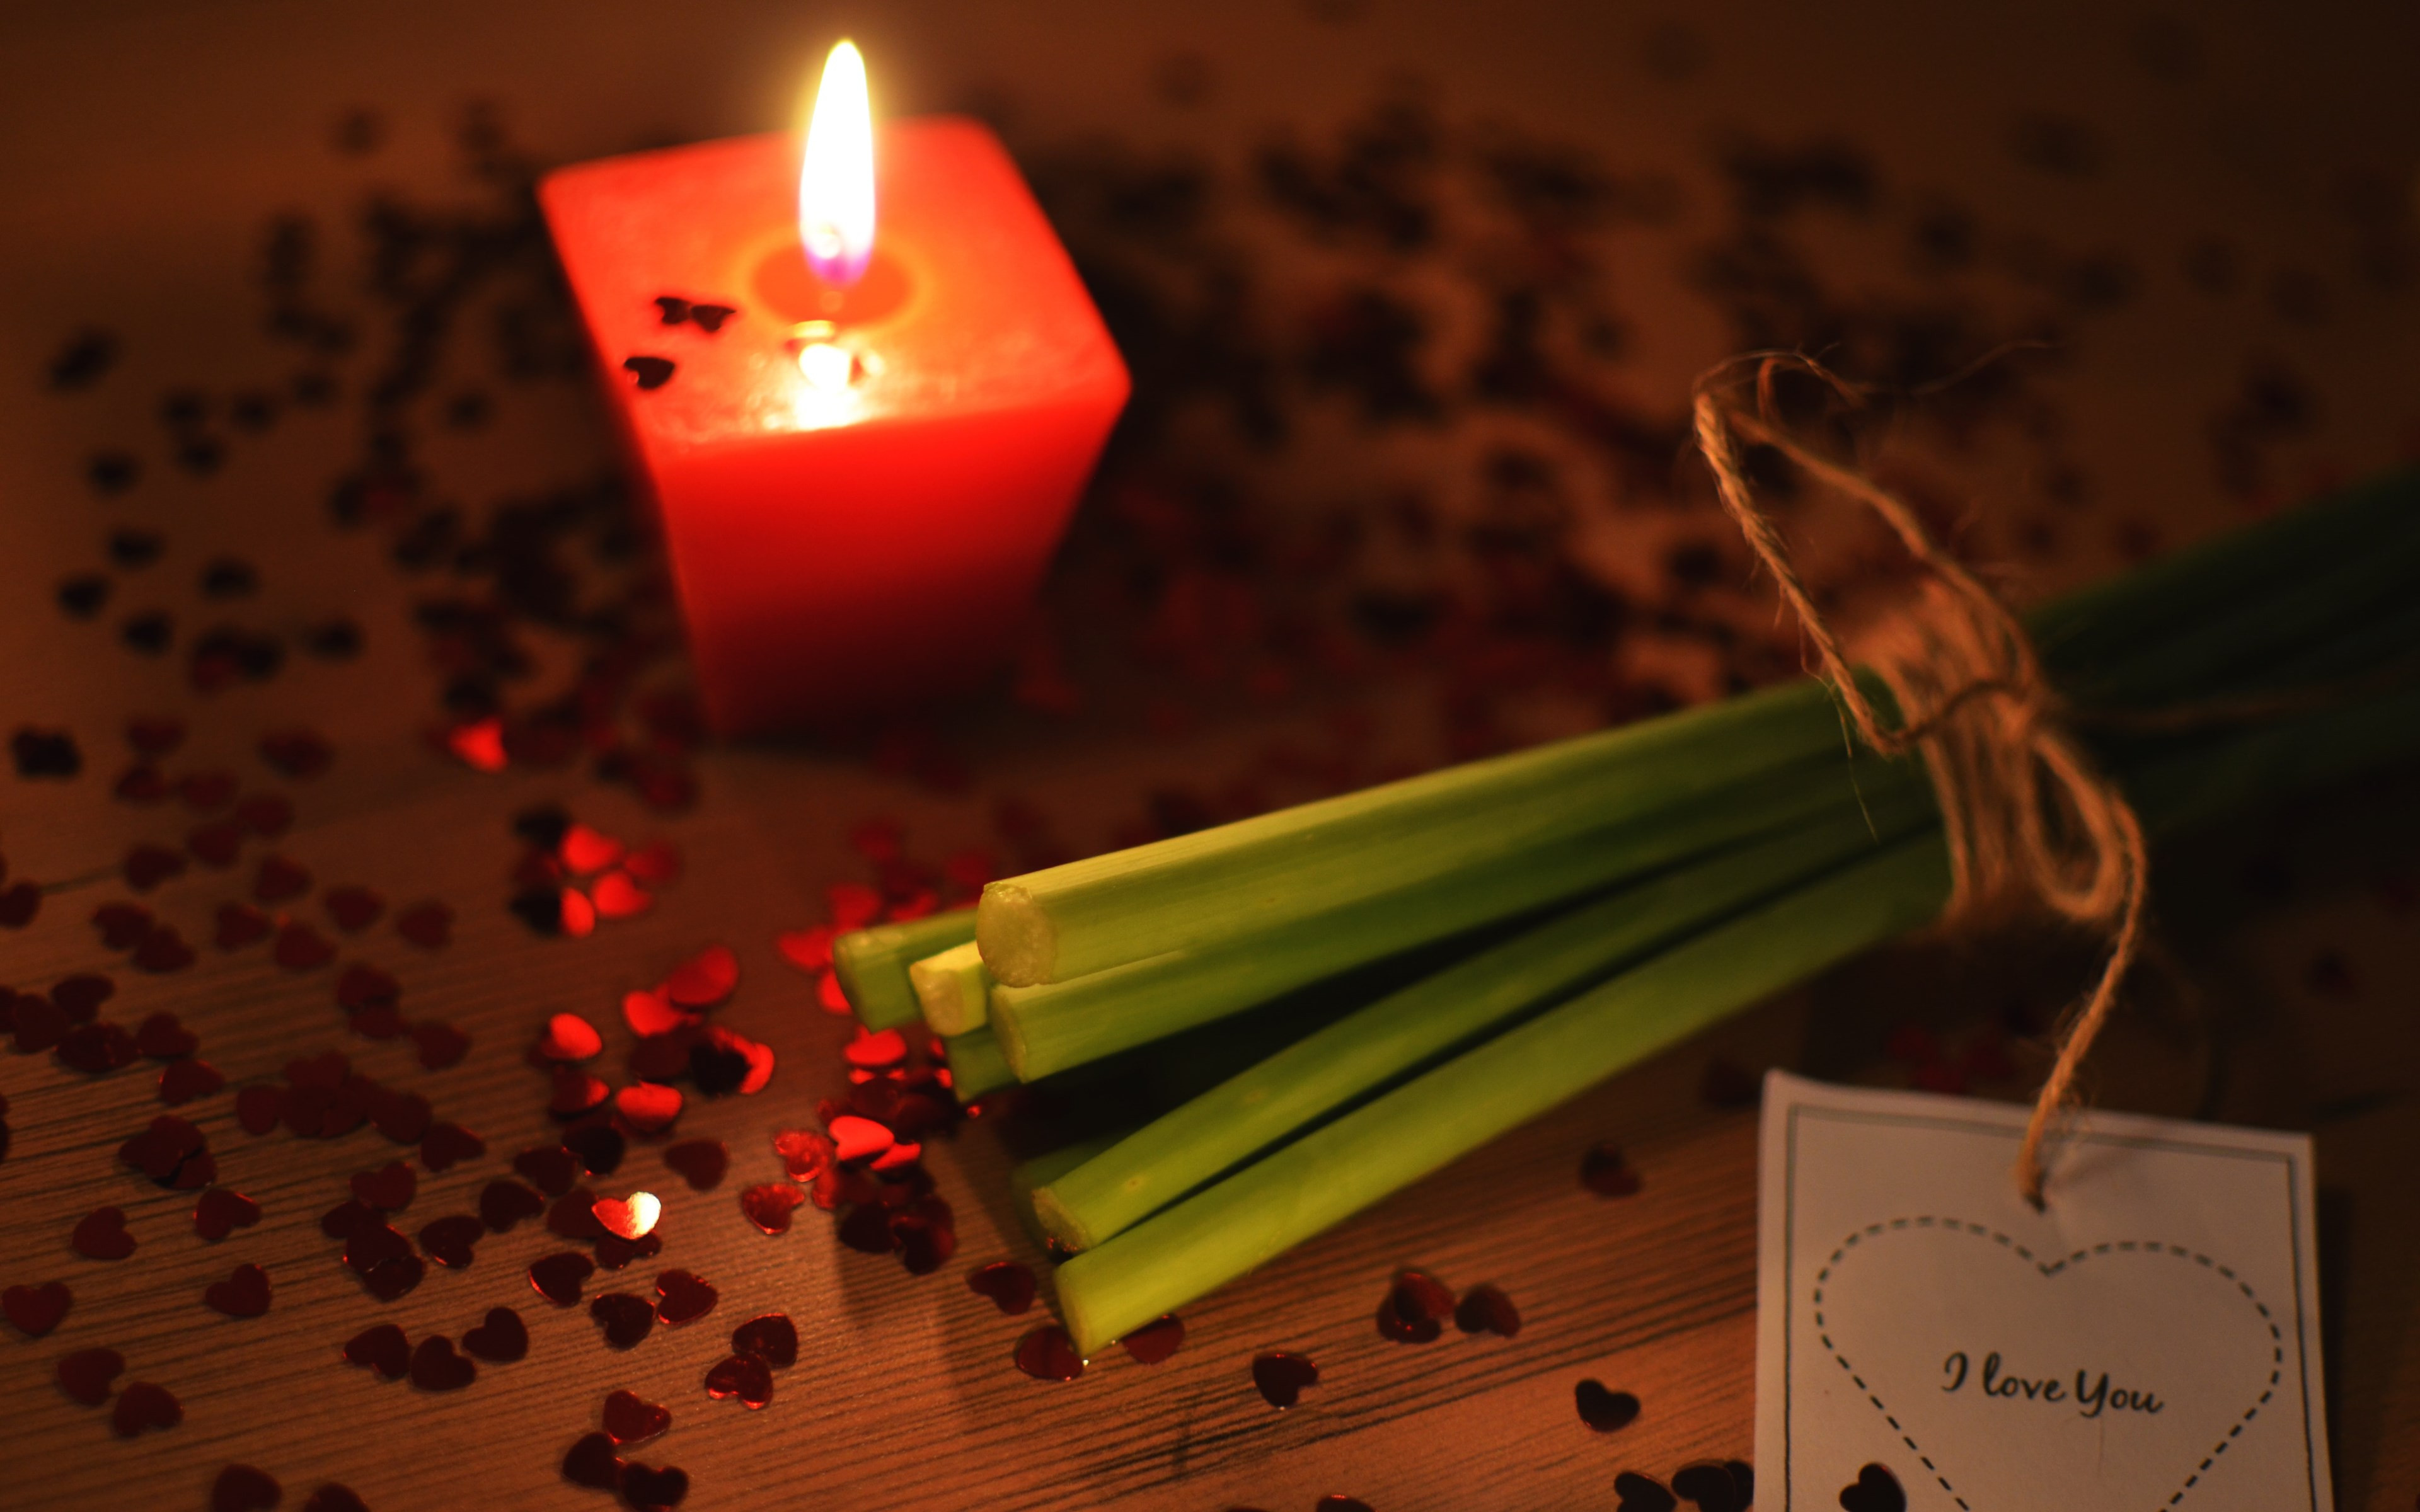 I love you, candlelight, romantic wallpaper 3840x2400